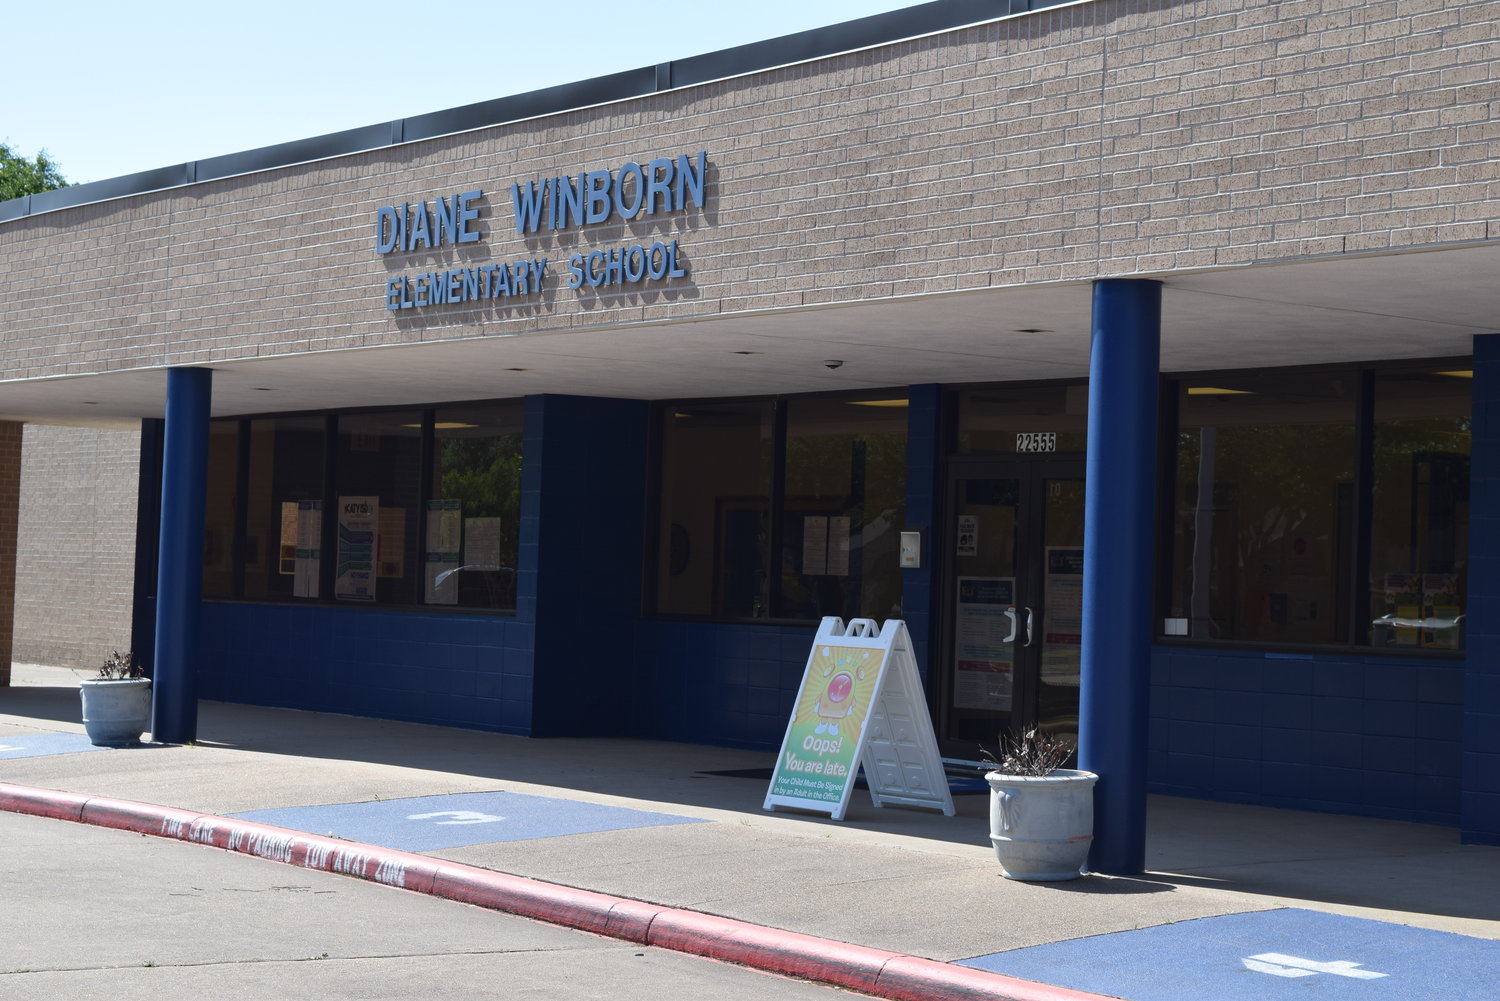 Winborn Elementary opened its doors in 1981 and has since grown from a small elementary to one with a student body approaching 700 students. Katy ISD hopes to take funding from a proposed bond to renovate older campuses such as Winborn and upgrade them to modern standards seen at newer campuses.